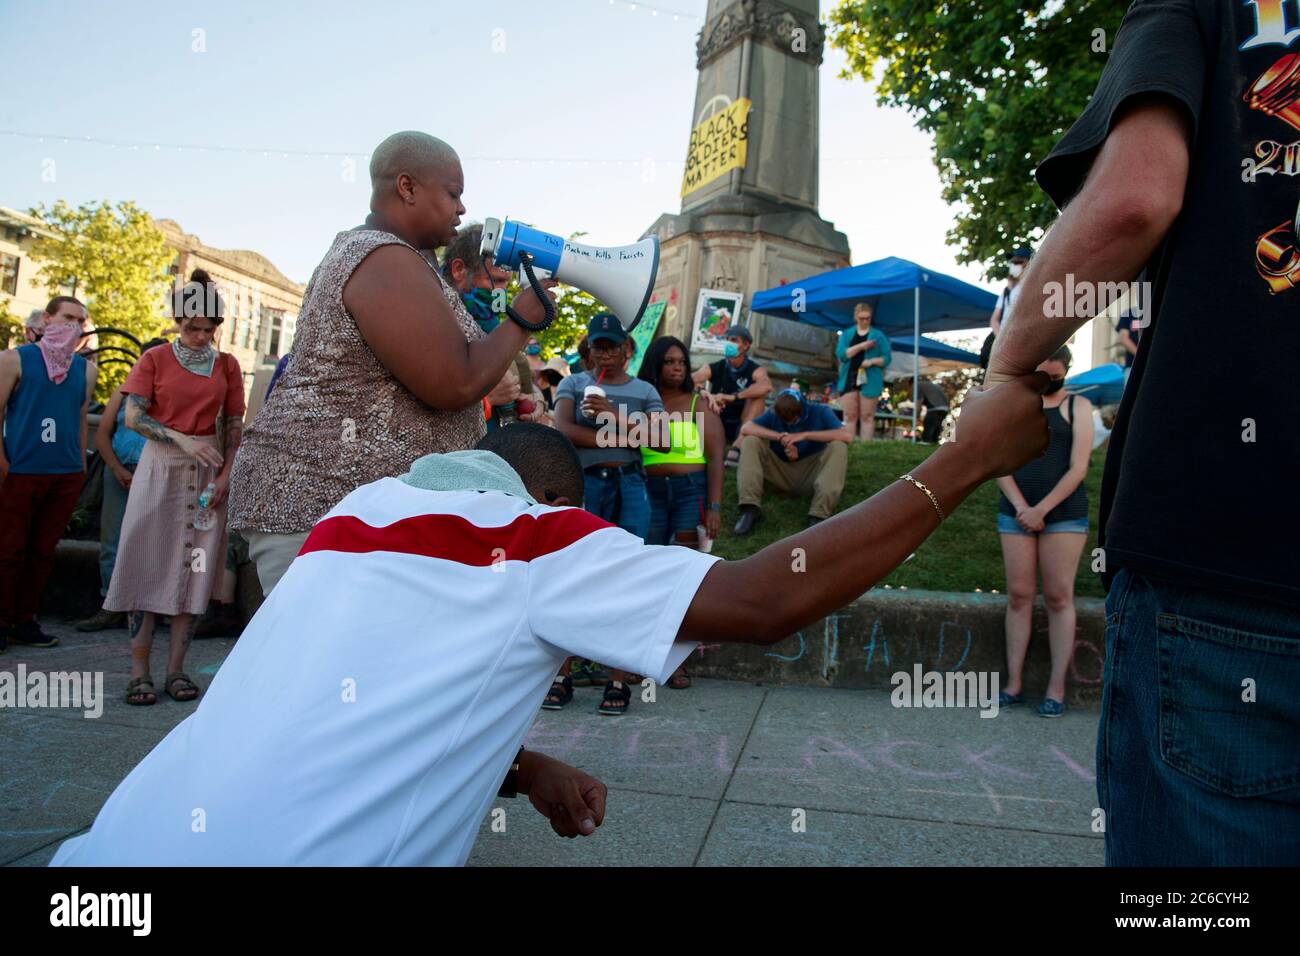 Bloomington, Indiana, USA. 7th June, 2020. Reverend Angela Carter, left, says some words for Big Mike (Michael Parker) during a vigil for BLM activist Big Mike (Michael Parker), who was shot and killed early Sunday. Parker had been at the Monroe County Square to protest against the killing of George Floyd, and said he was going to a convenience store to get supplies for the protest, but was shot and killed during an apparent robbery. The protesters heard the shots several blocks away. Credit: Jeremy Hogan/SOPA Images/ZUMA Wire/Alamy Live News Stock Photo